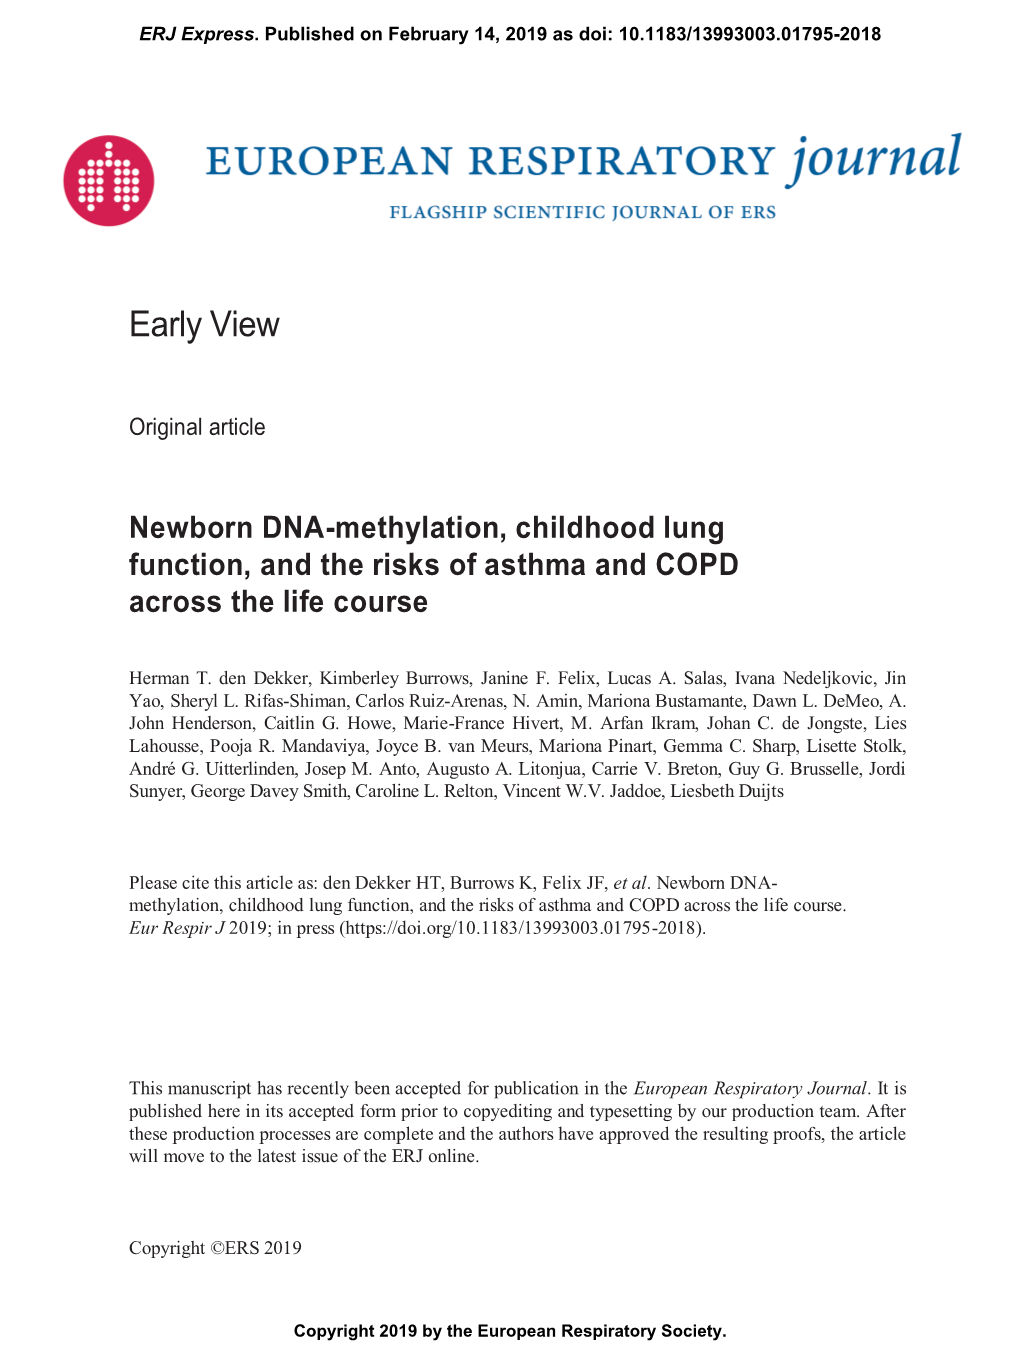 Newborn DNA-Methylation, Childhood Lung Function, and the Risks of Asthma and COPD Across the Life Course